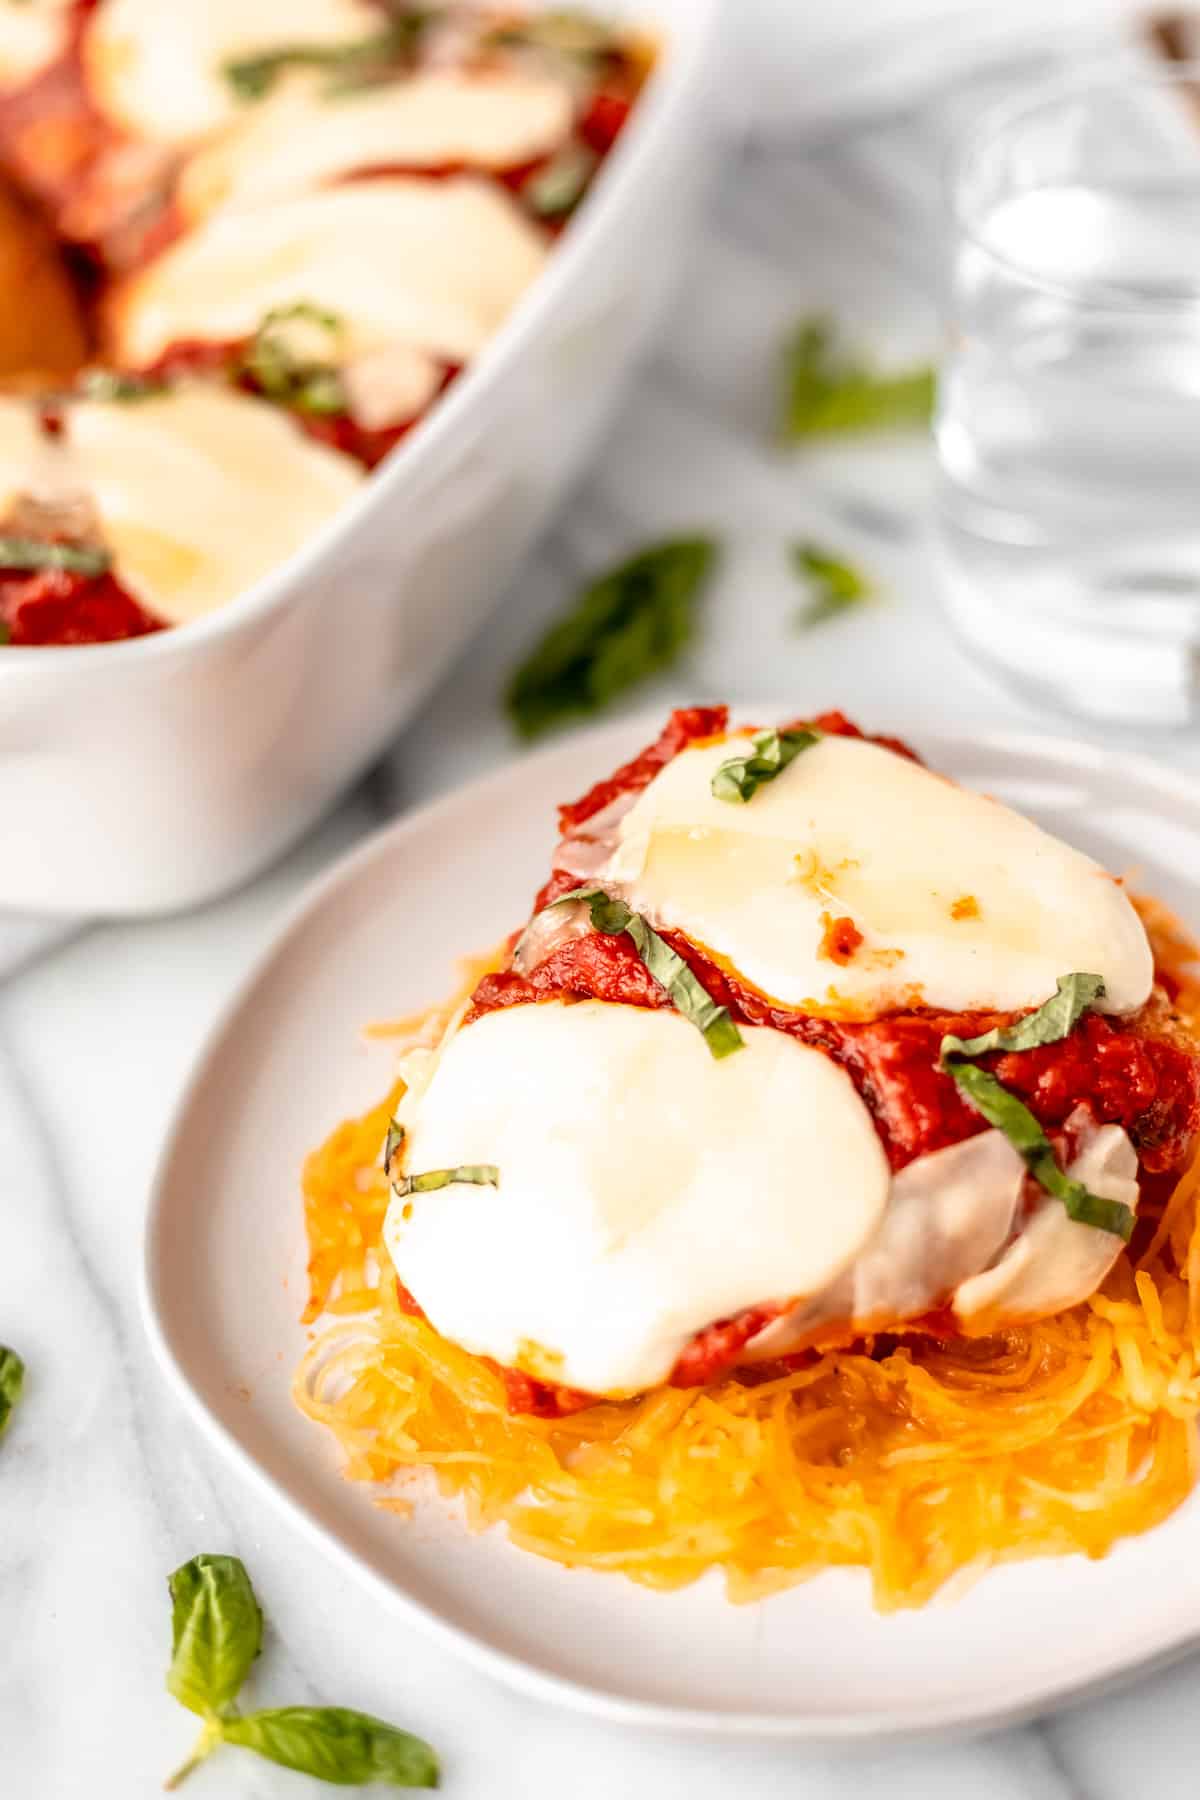 A serving of spaghetti squash chicken parmesan on a white dish with a white casserole dish and glass of water in the background.